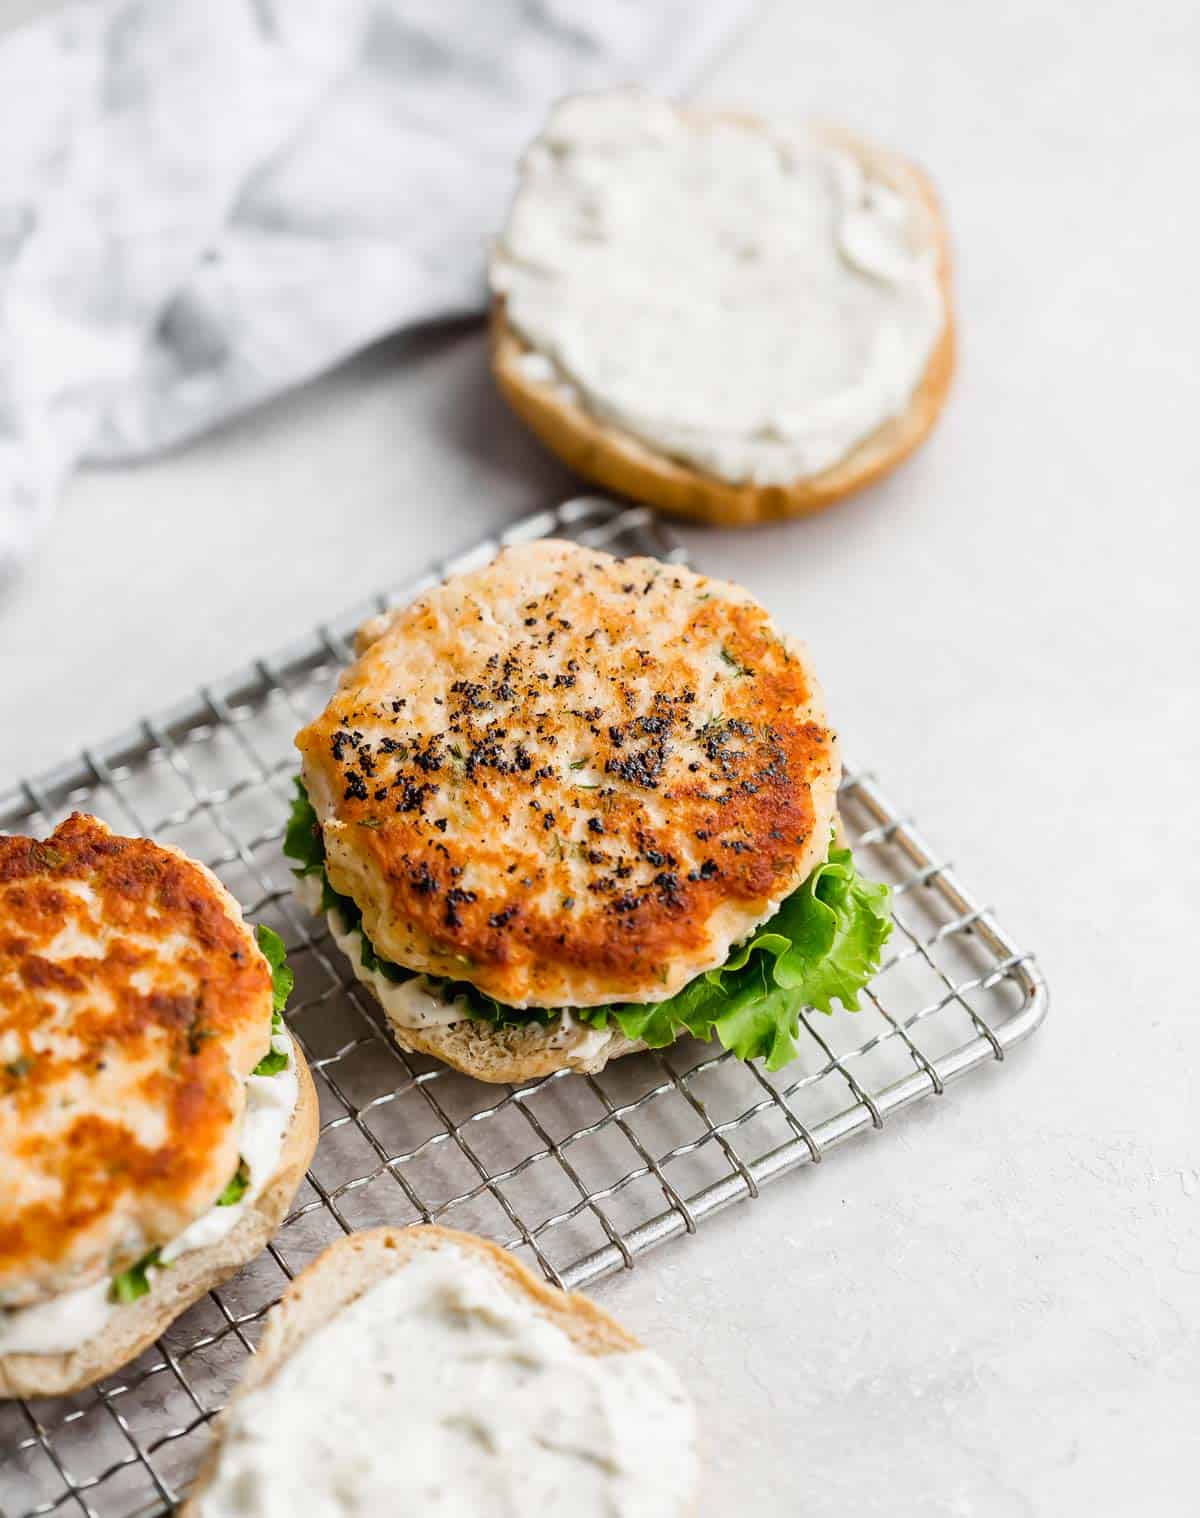 An easy to make salmon burger on a bun with lettuce and a lemon dill sauce.